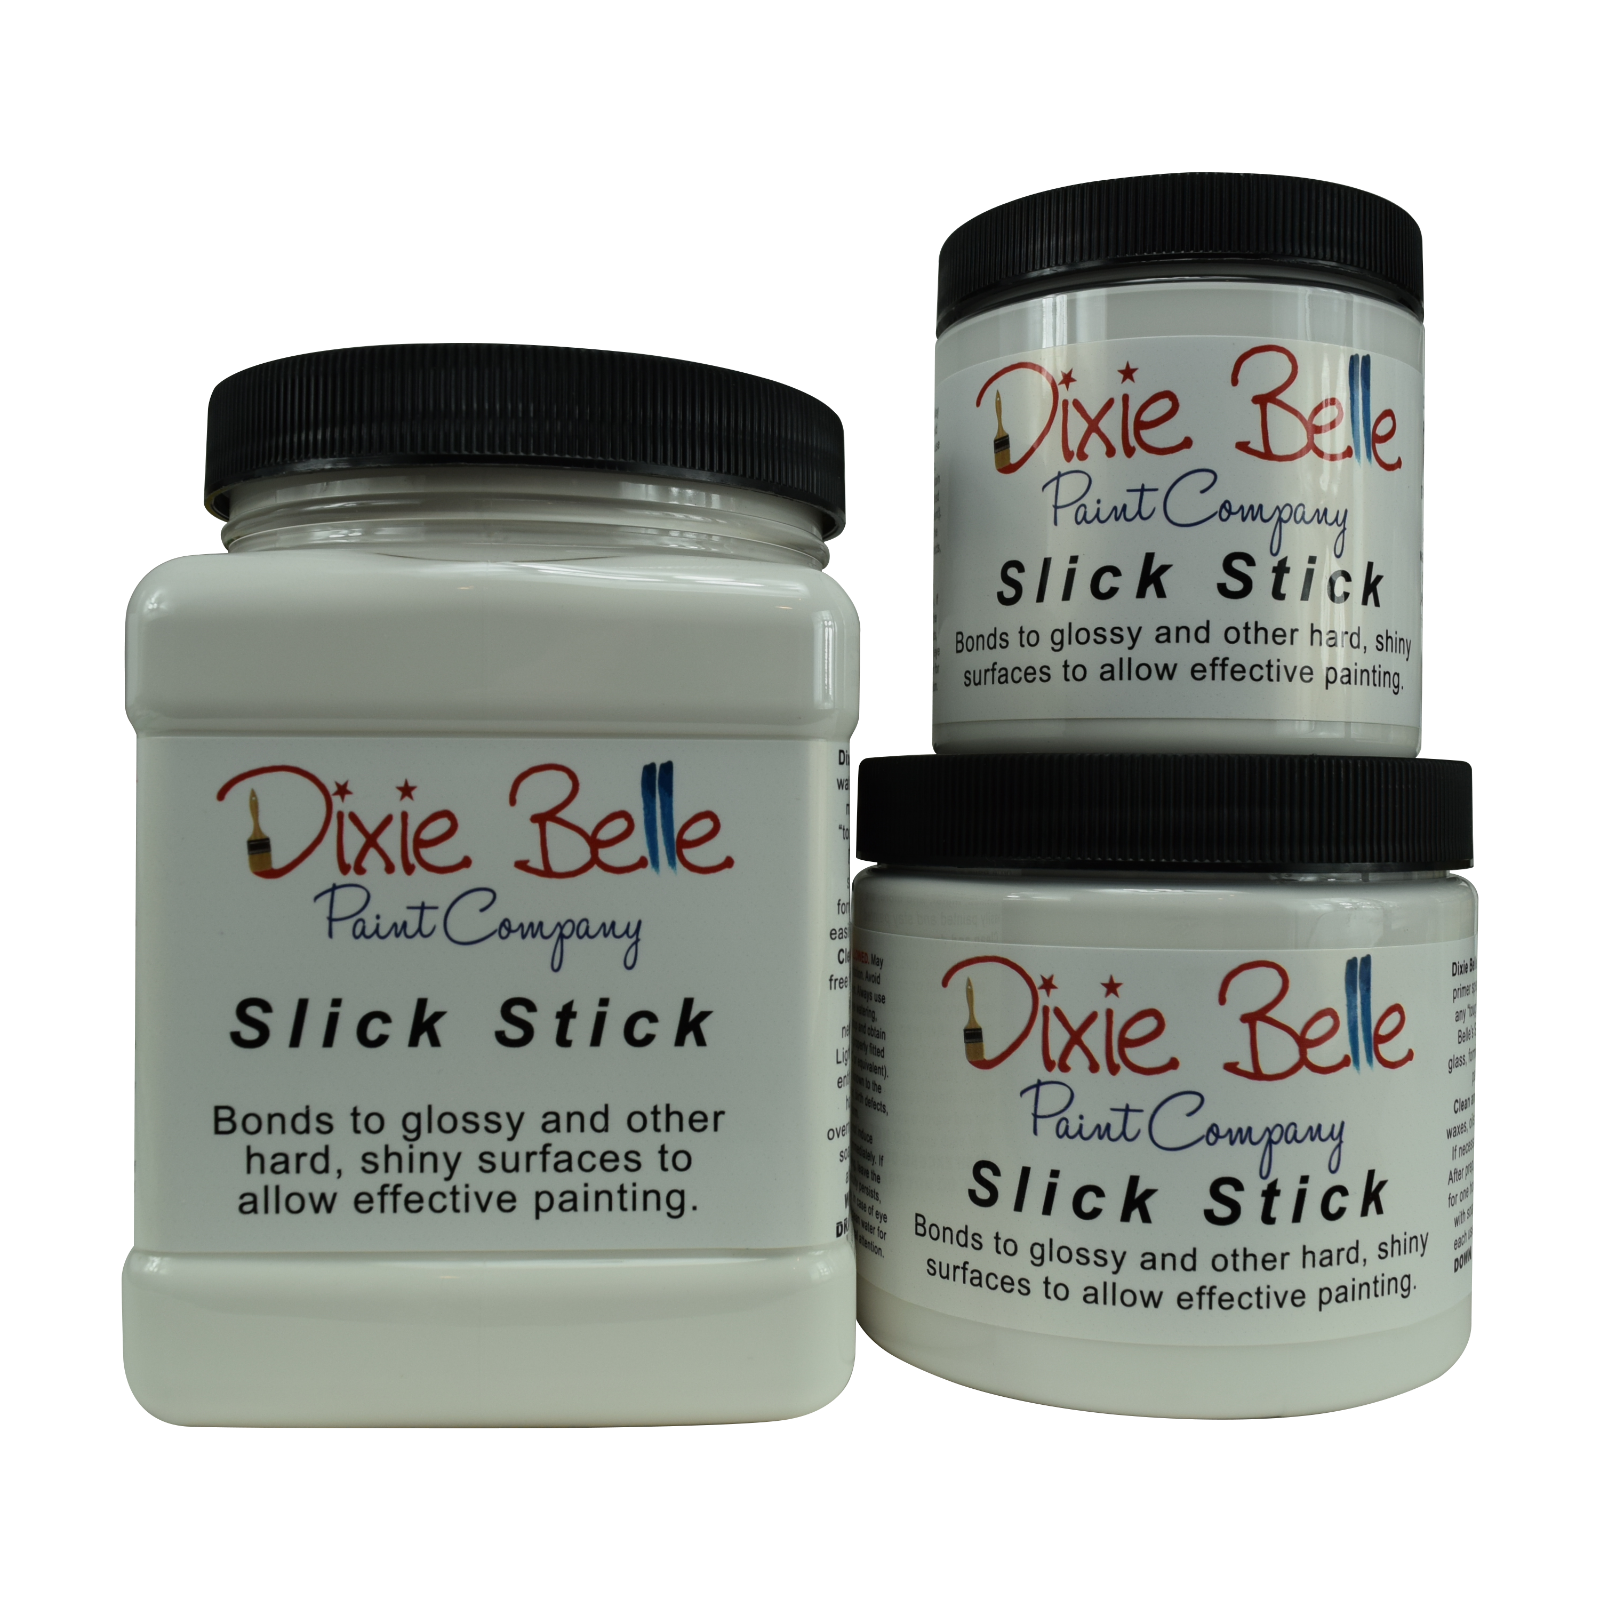 Dixie Belle Slick Stick, 8 16 32oz, Free Shipping Orders > $35